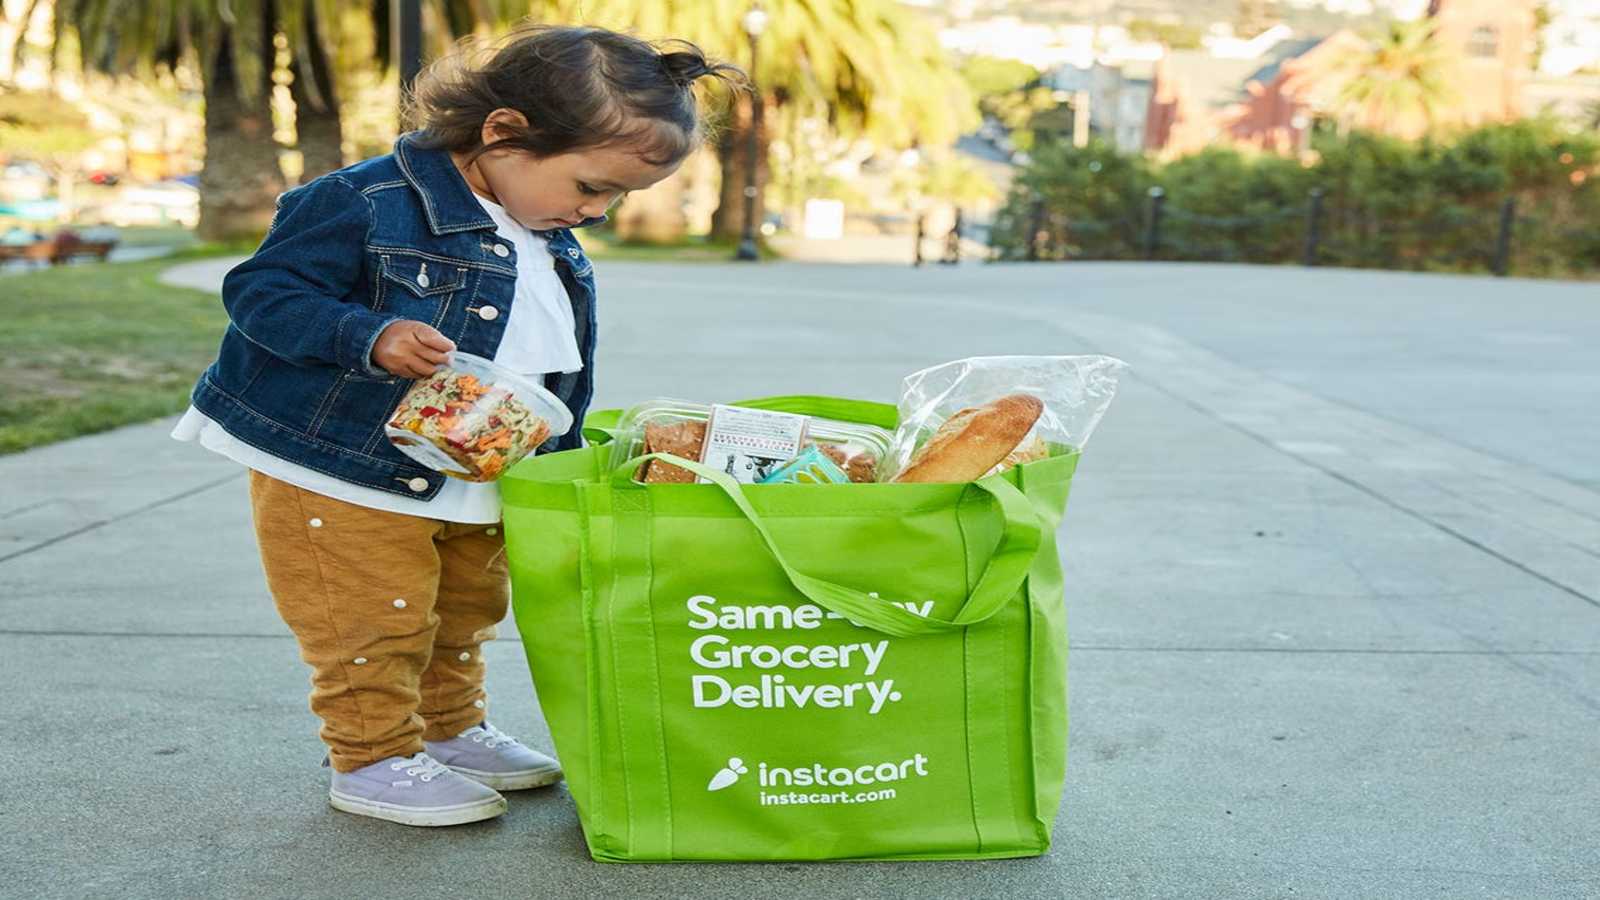 Grocery delivery service Instacart raises US$200m in new funding round